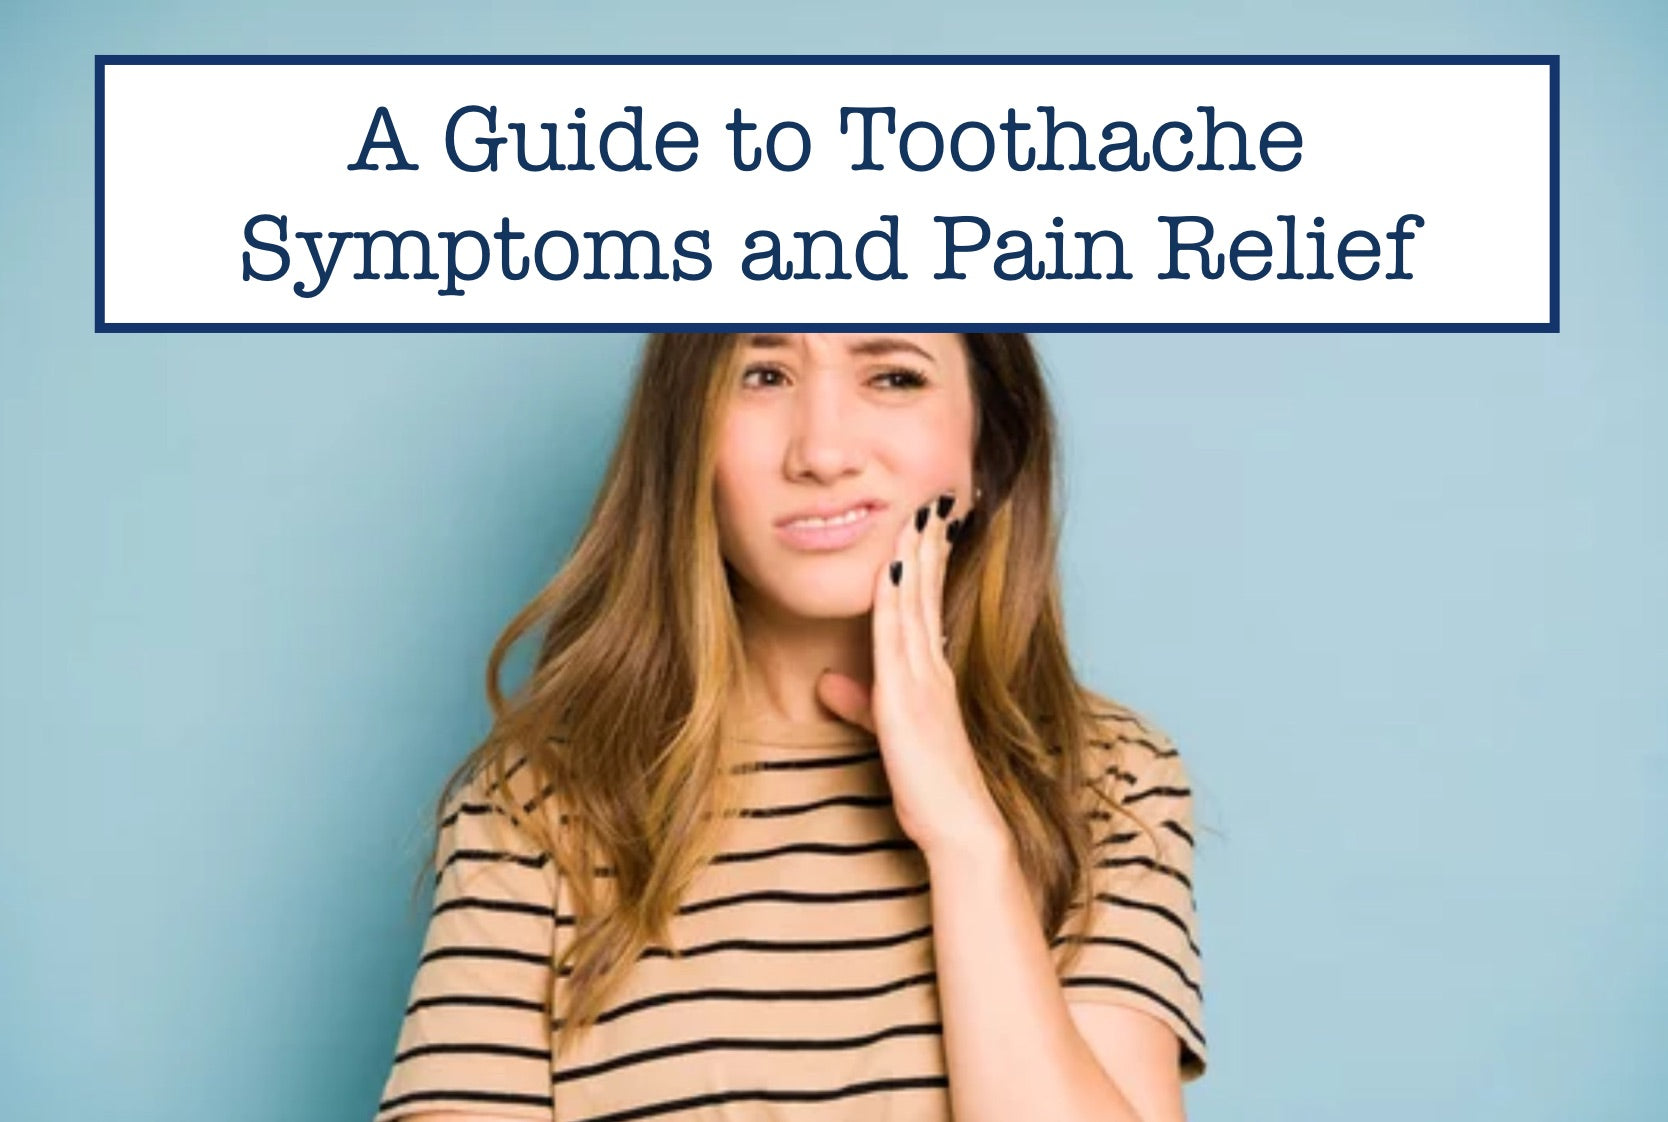 A Guide to Toothache Symptoms and Pain Relief